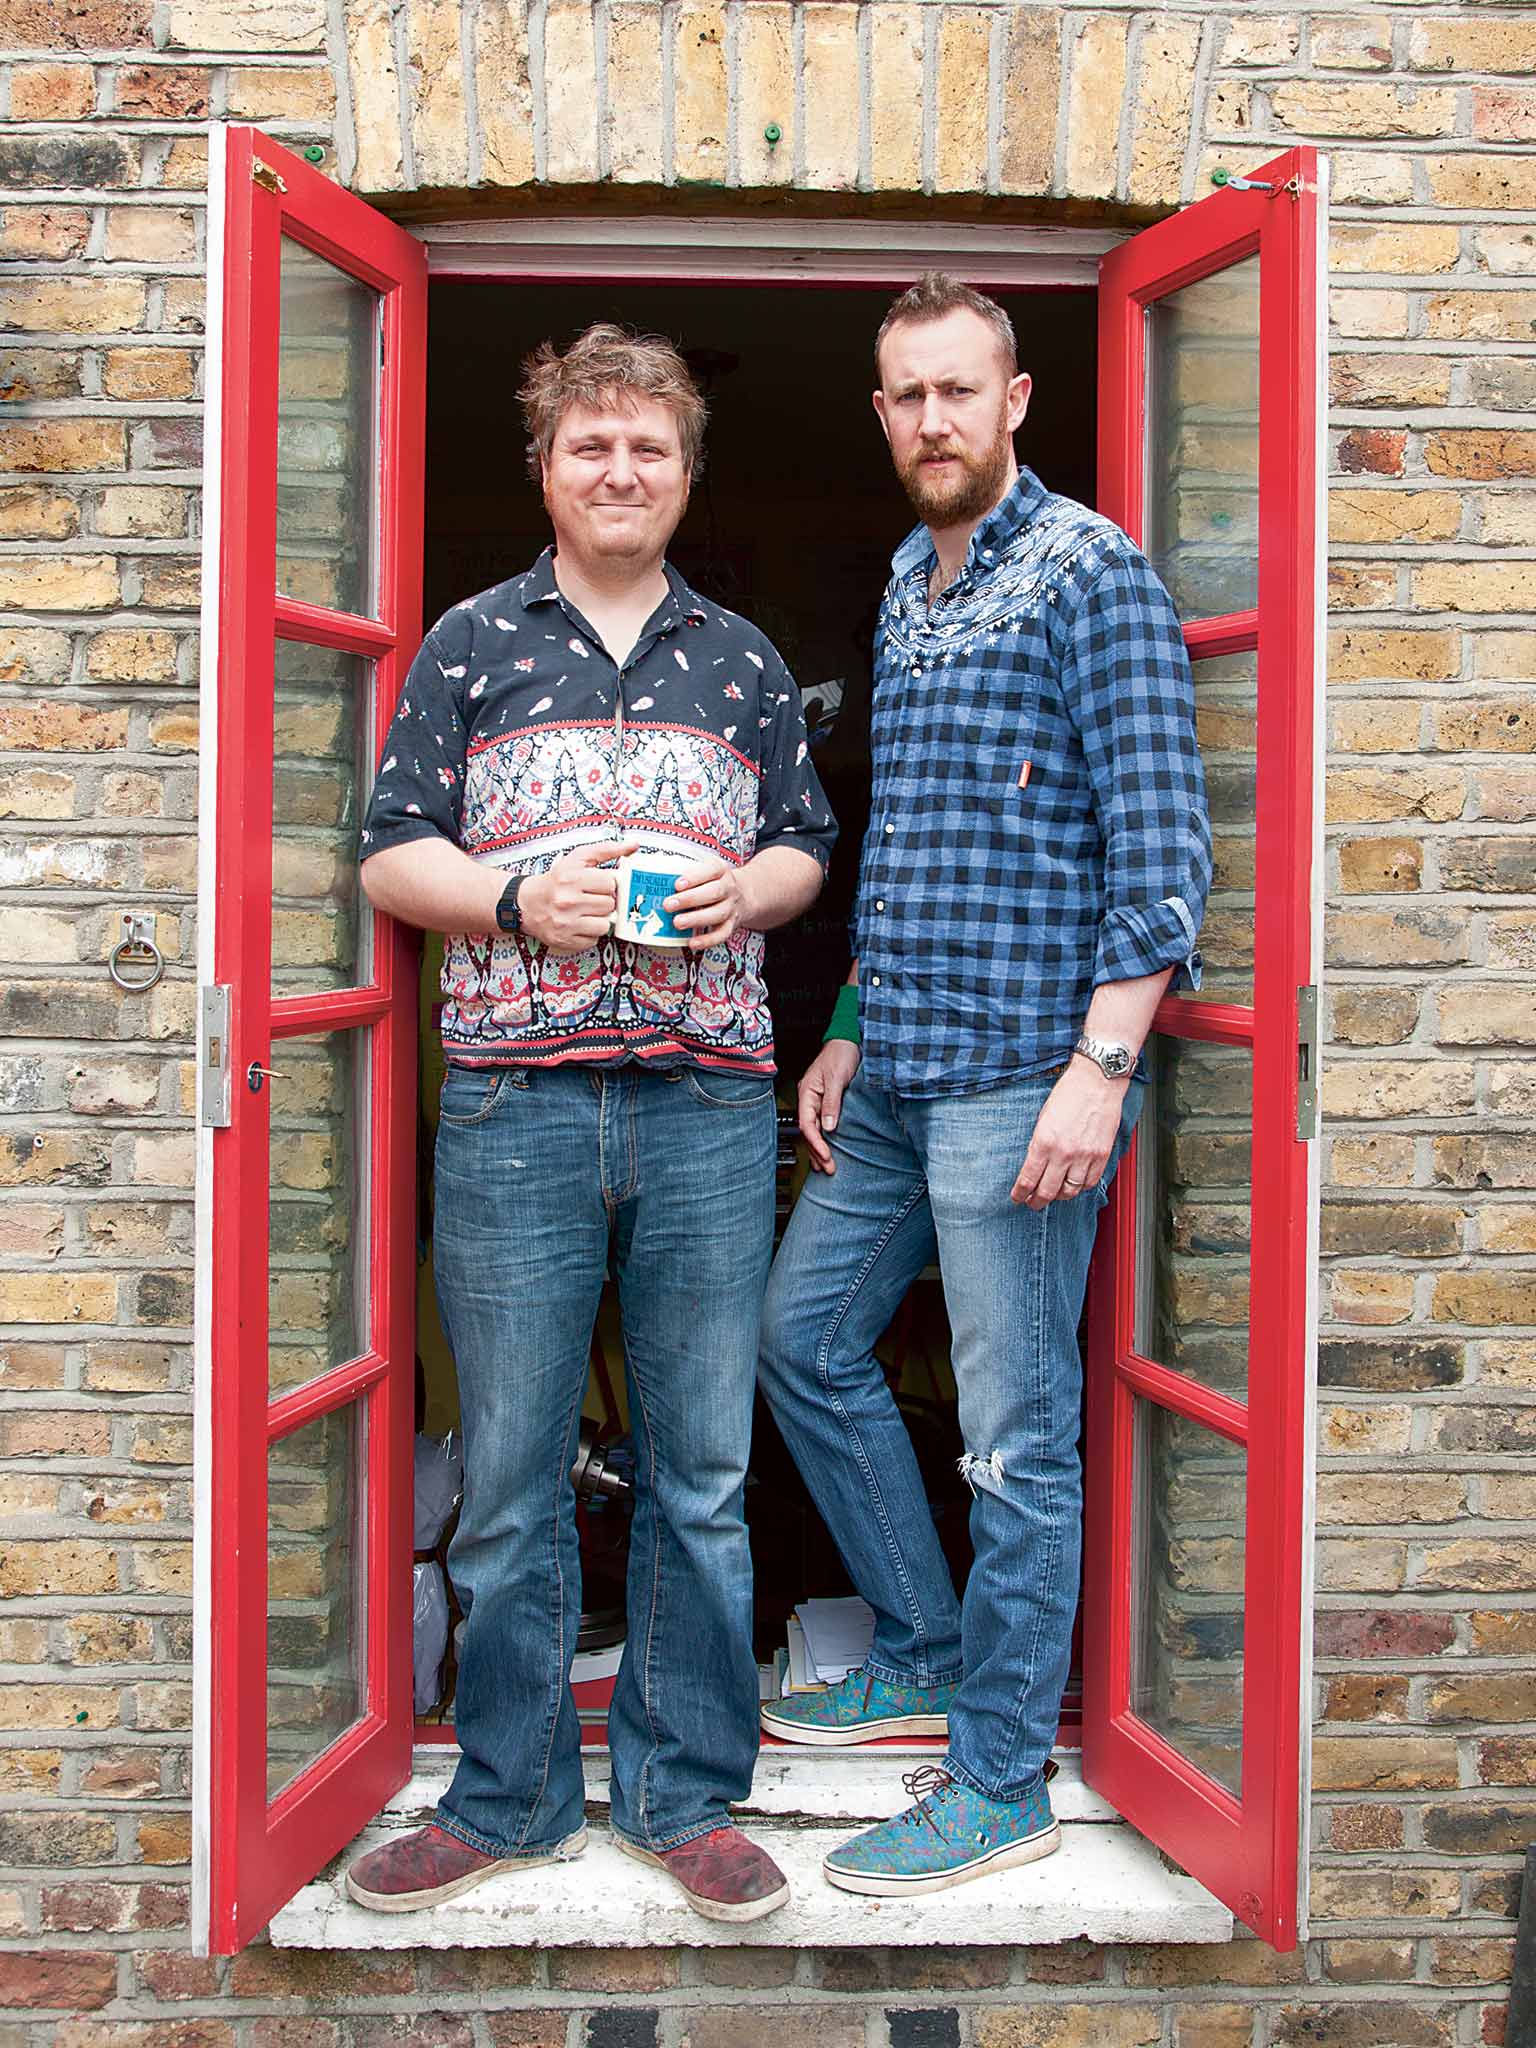 Alex Horne (right) and Tim Key